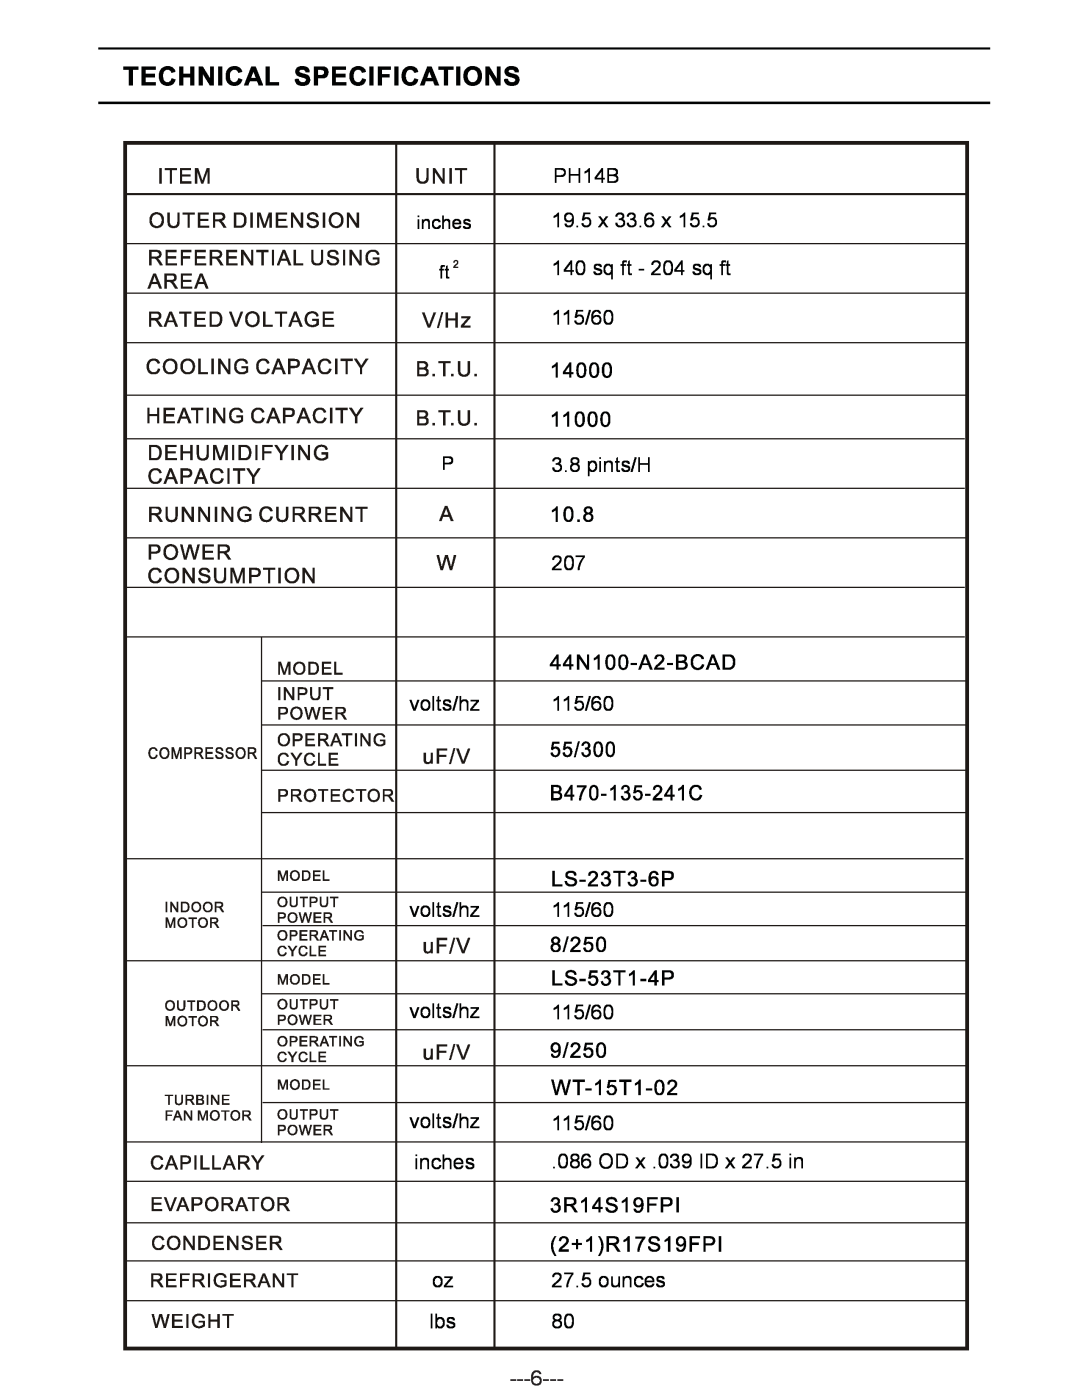 Friedrich Portable Air Conditioner, Models PH14B technical specifications 